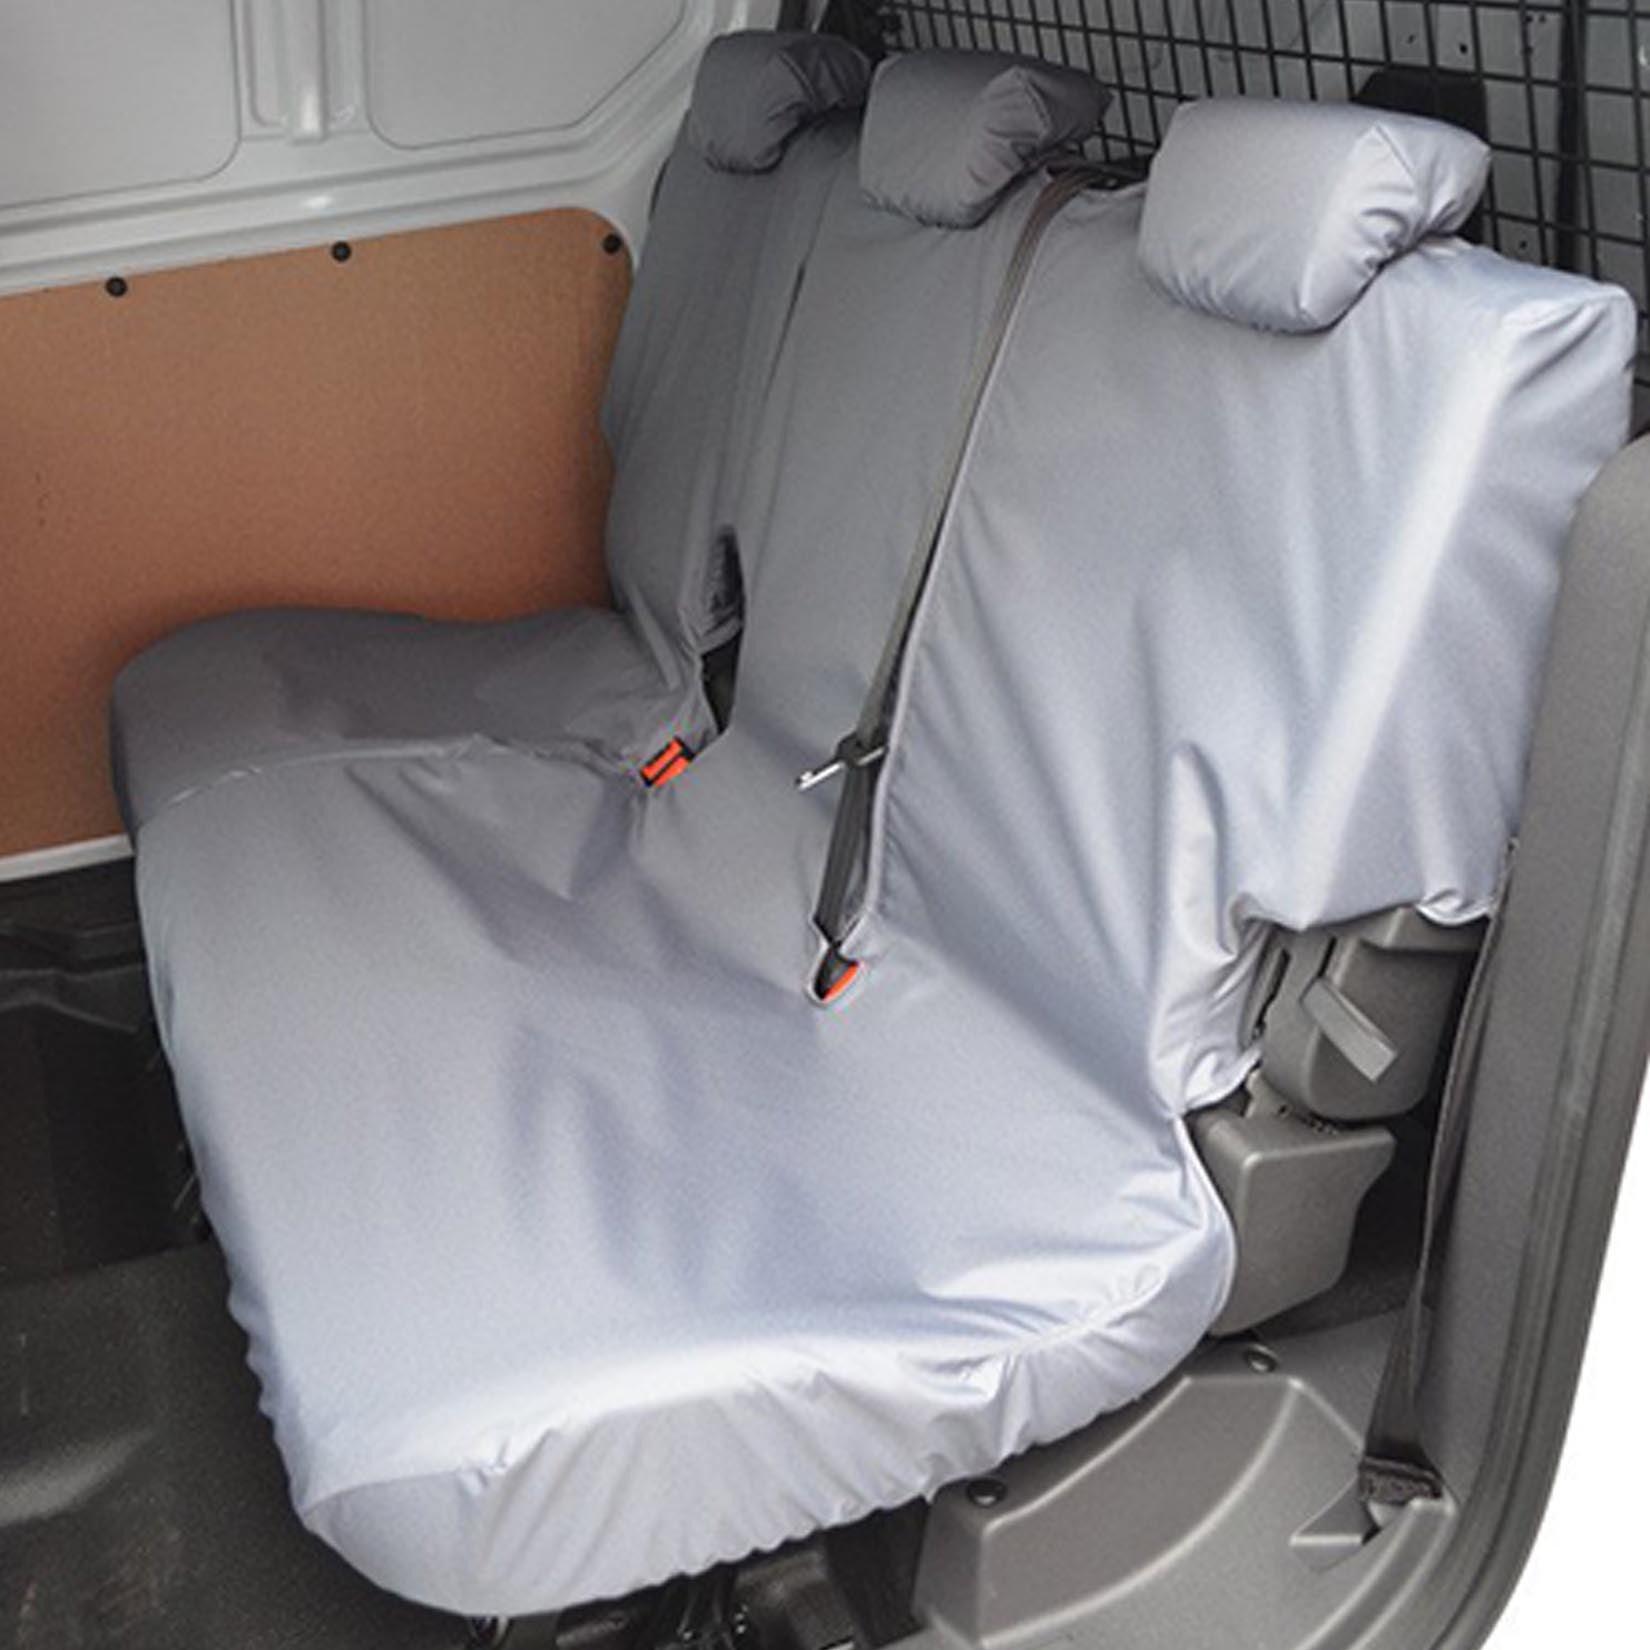 FORD TRANSIT CONNECT VAN 2018 ON DOUBLE CAB IN VAN REAR SEAT COVERS – GREY - Storm Xccessories2